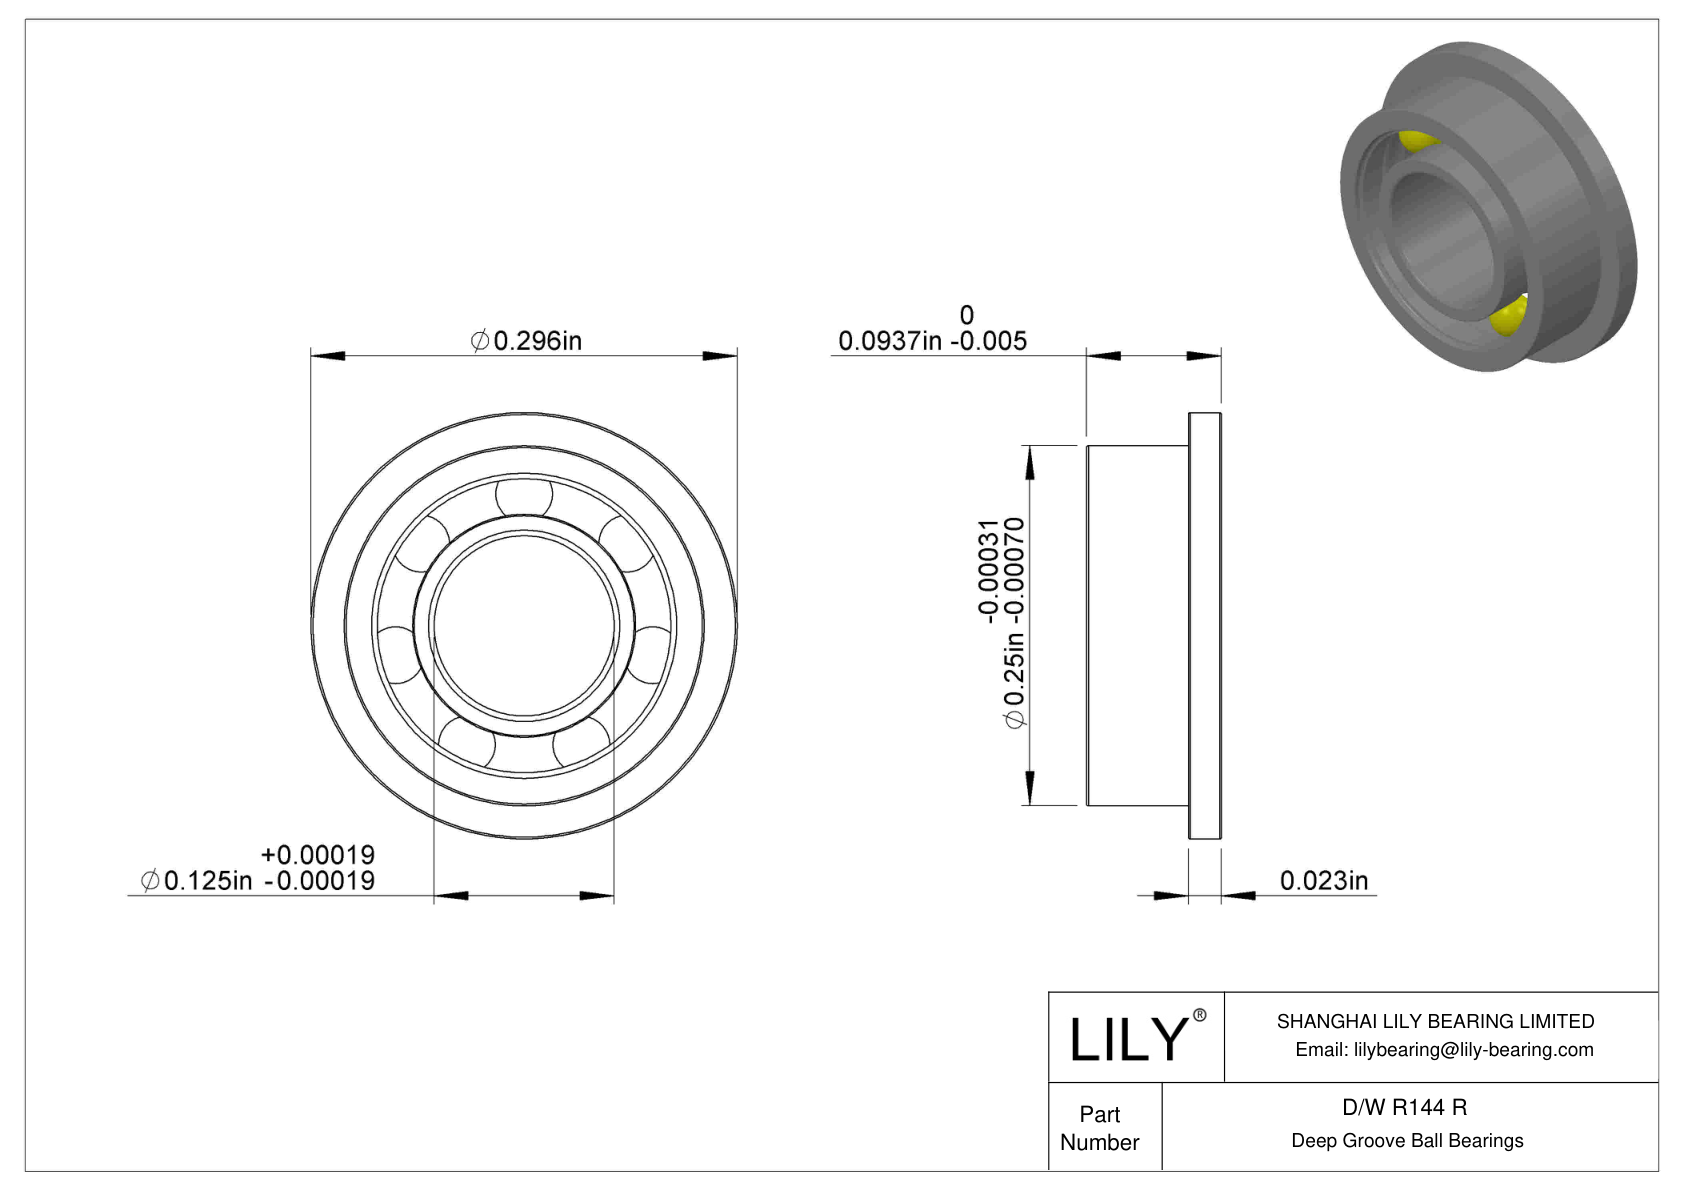 D/W R144 R Flanged Ball Bearings cad drawing